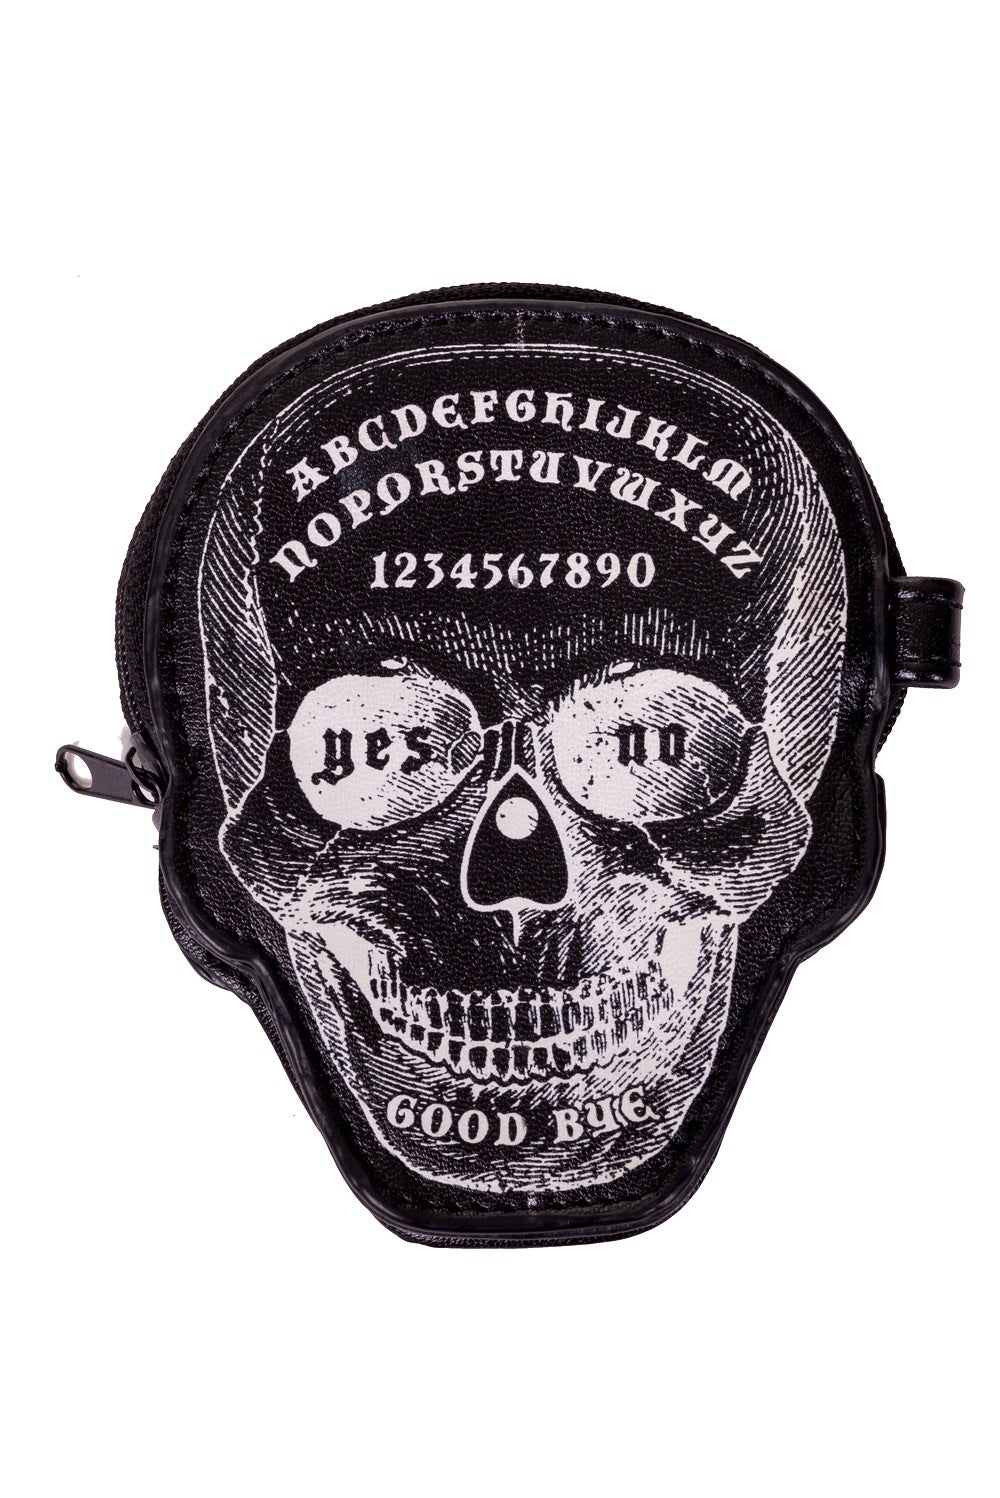 Skull shaped mini coin purse with skull print and ouija details. 